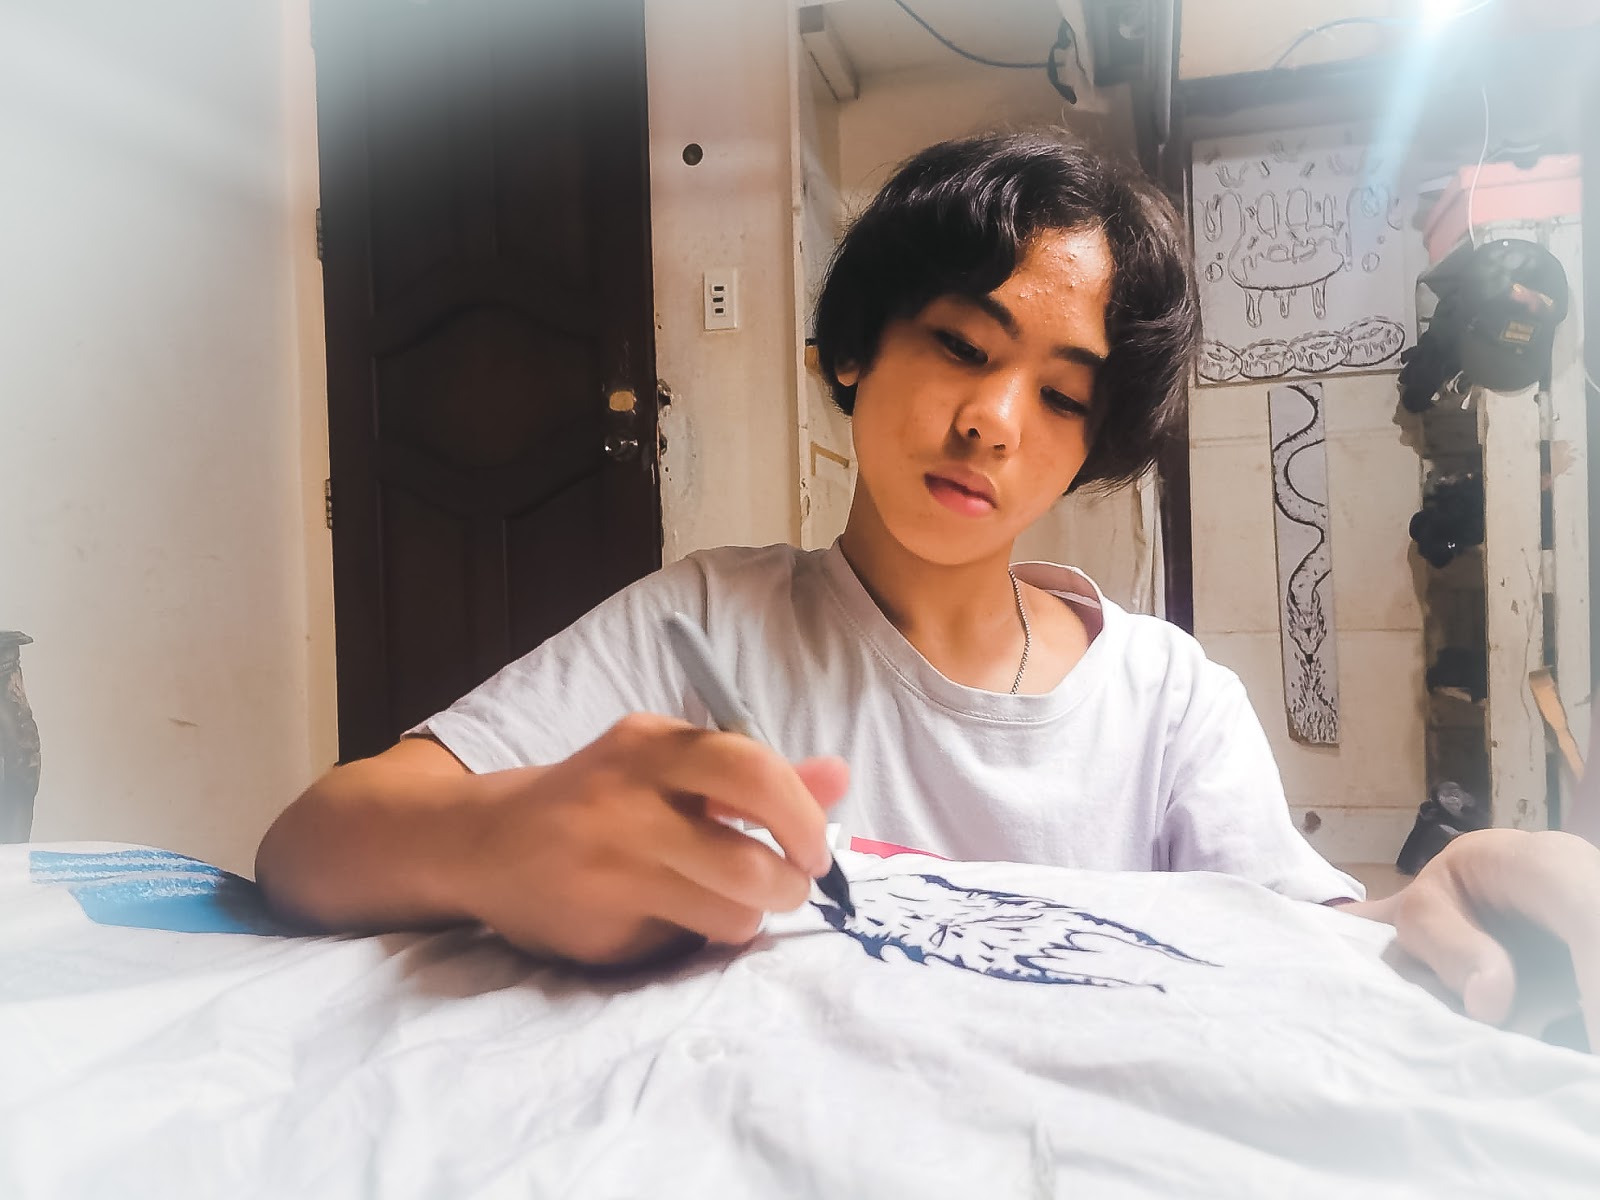 Meet JP Choa, the youngest artist of the Choa's siblings